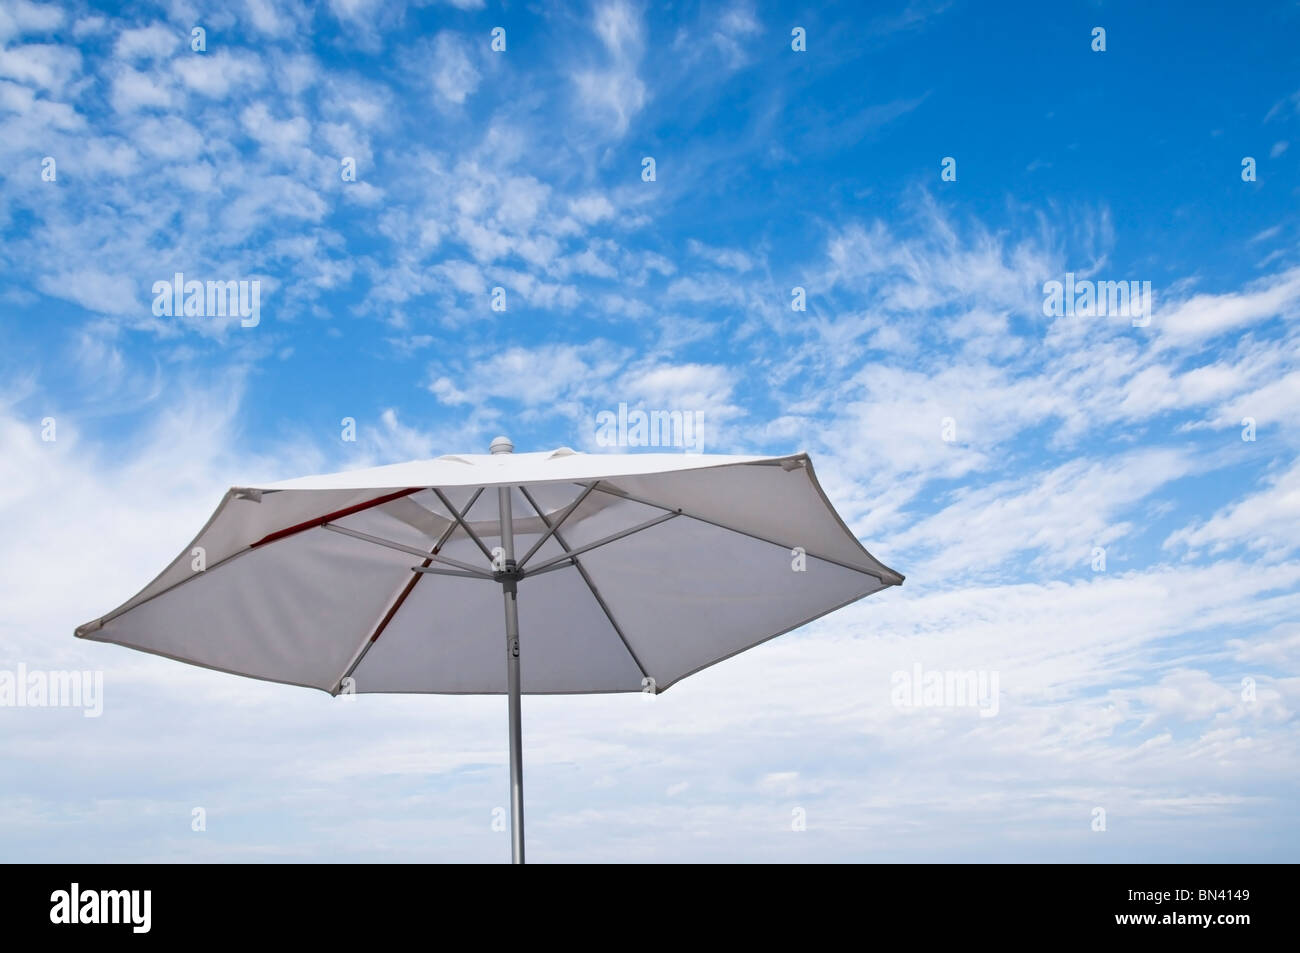 Upward view of an open white patio umbrella against a pretty sky in a tropical climate. Stock Photo